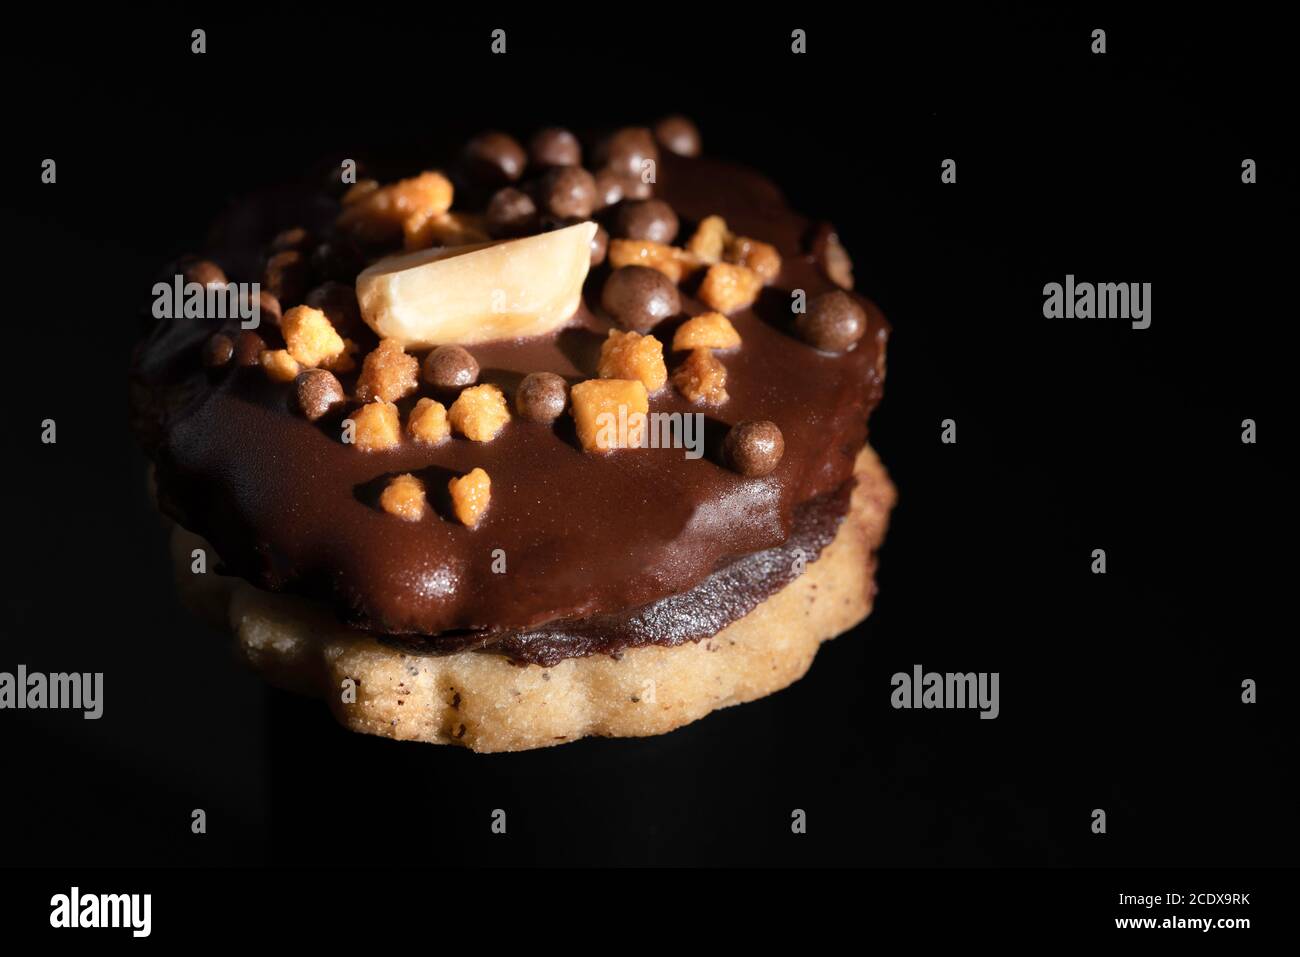 Brown Isler (or Ischler, Ishler) Cookies with hazelnuts and peanut brittle on brown background, dating back to Austro-Hungarian Empire Stock Photo